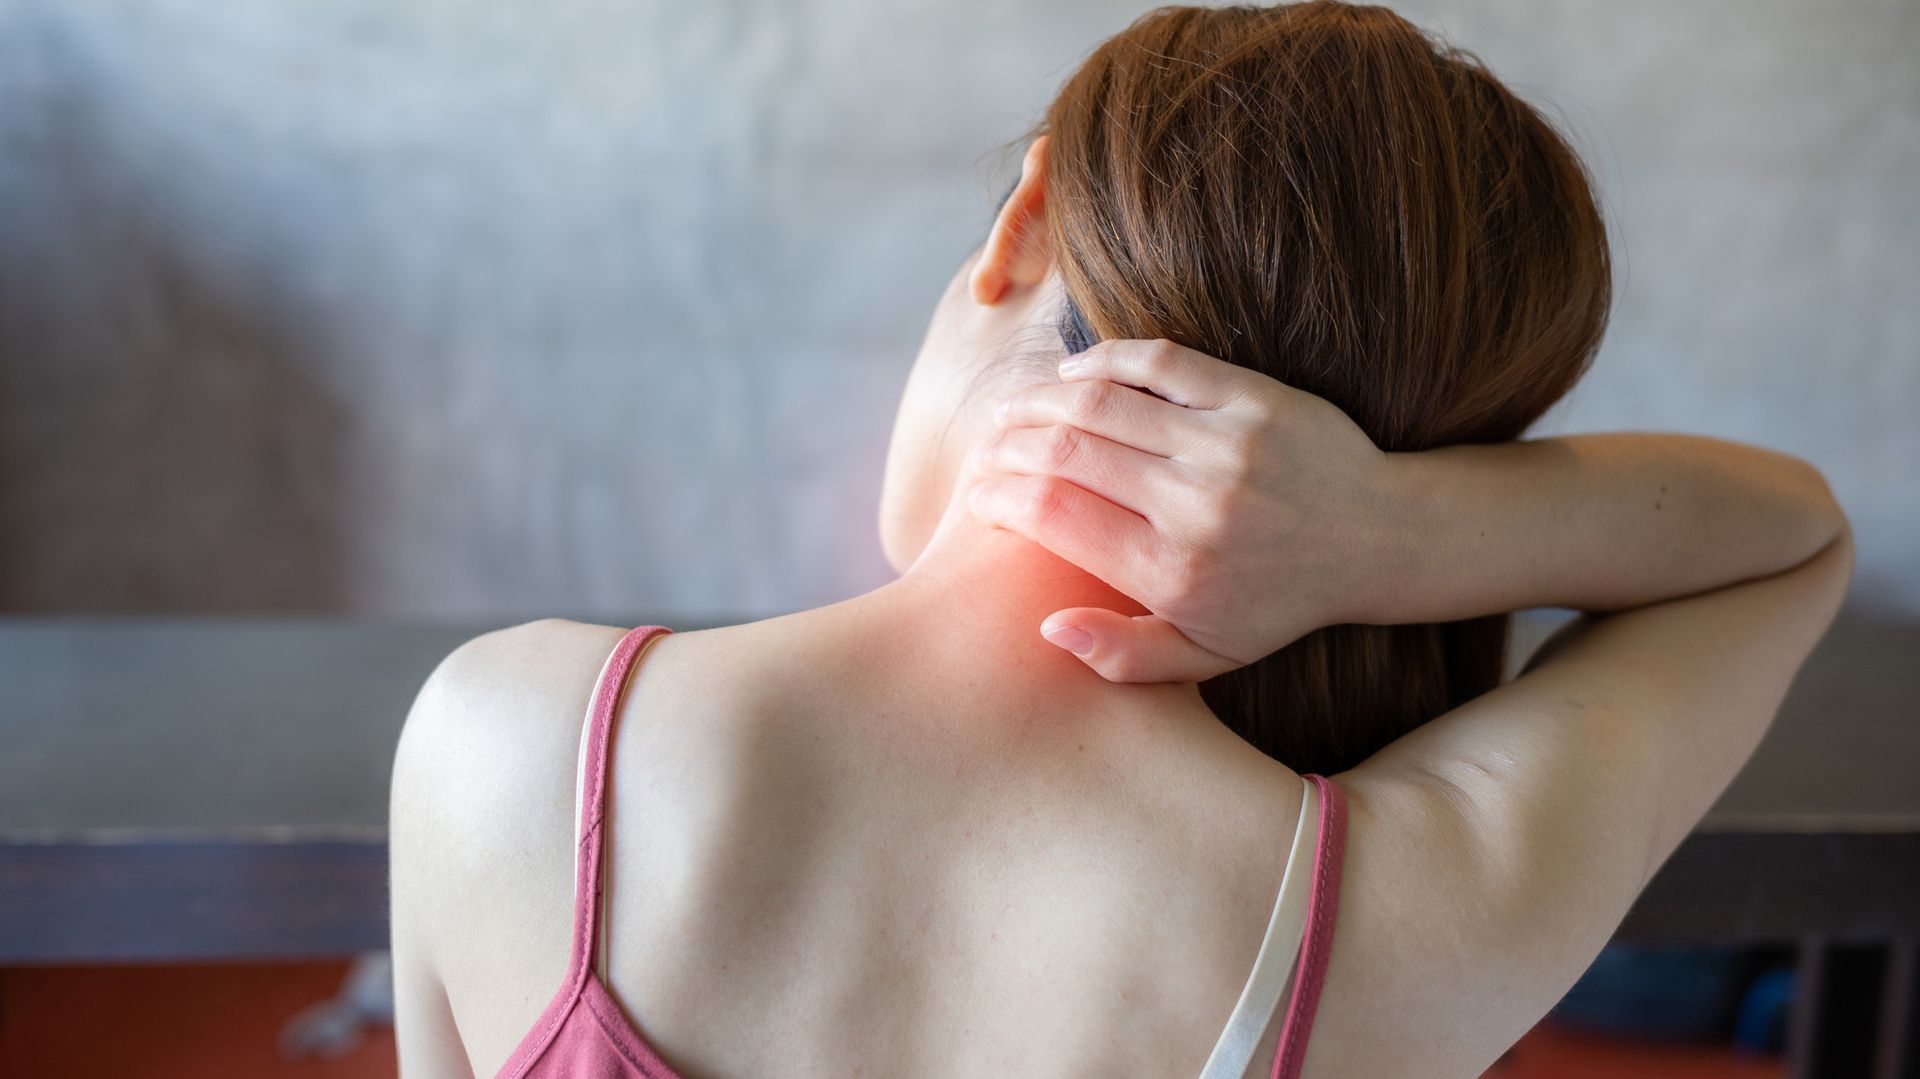 Woman Having Back Pain - New Bloomfield, PA - Mulhollem Chiropractic Clinic